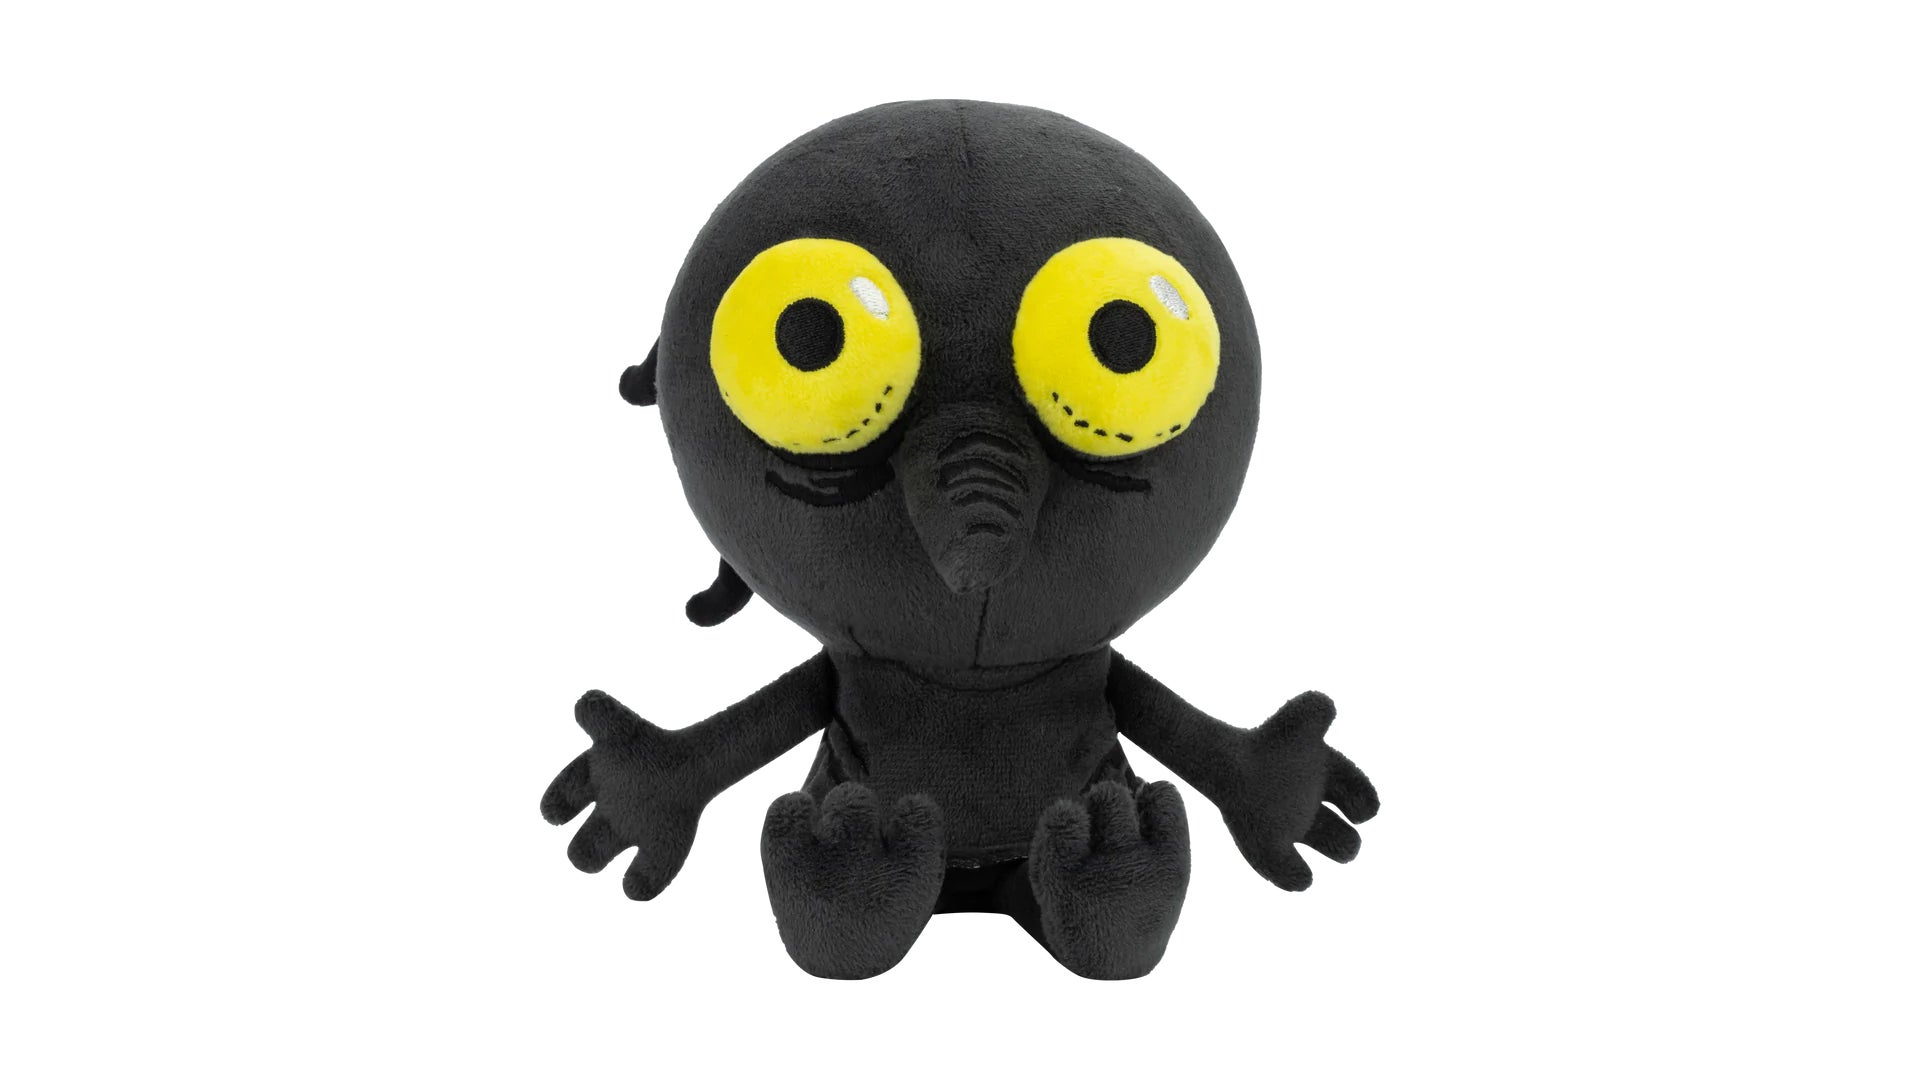 A plushie soft toy of the shade from The Longing - a little bald soot-black golbin with big bug yellow eyes